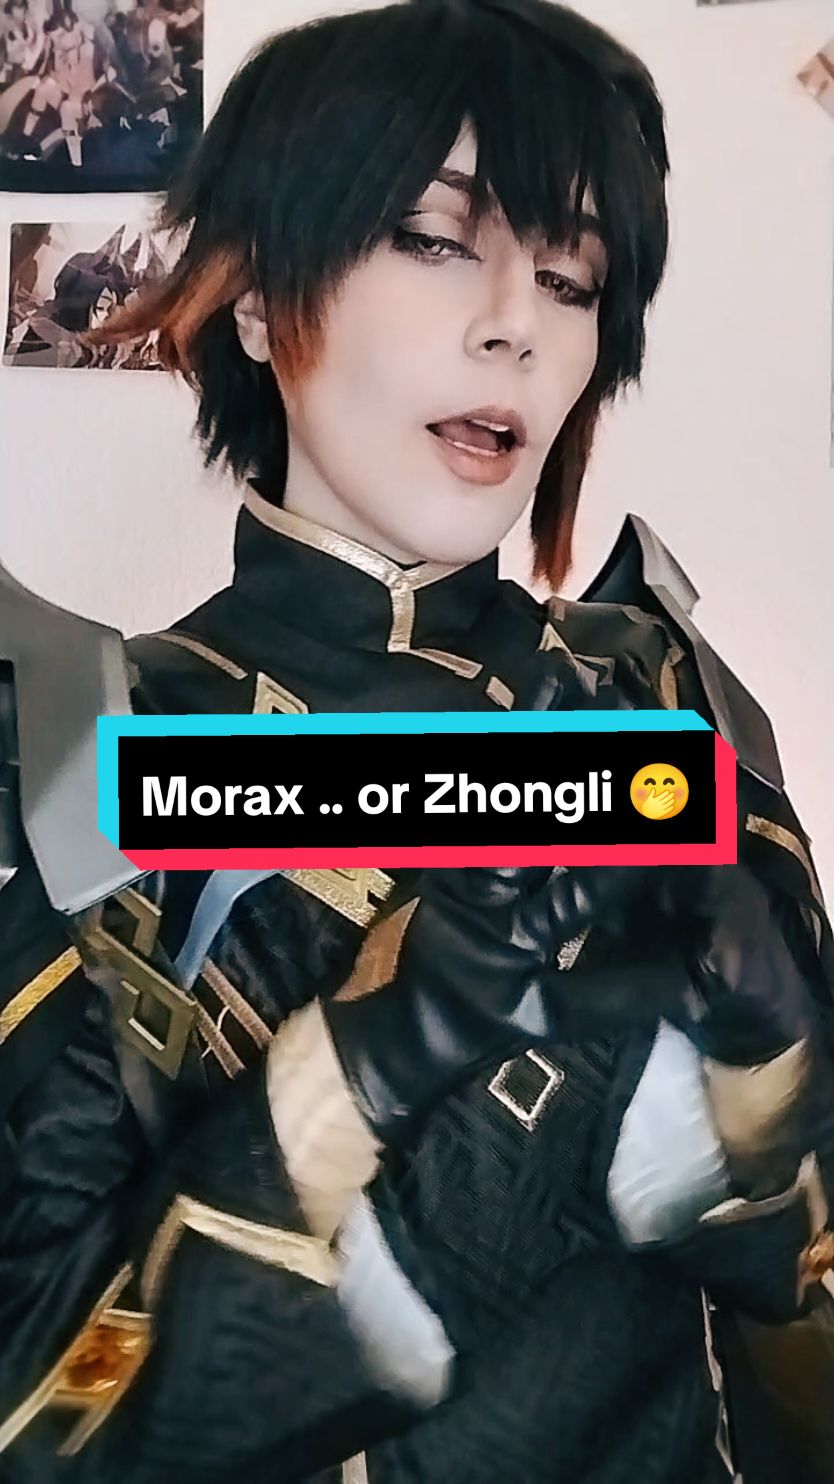 Let's back with Zhongli ! Inhad a lot of lines with him 🤭#GenshinImpact #genshin #zhongli #zhonglicosplay #genshincosplay #genshinimpactcosplay #crossplay #hoyoverse #hoyoversecosplay 